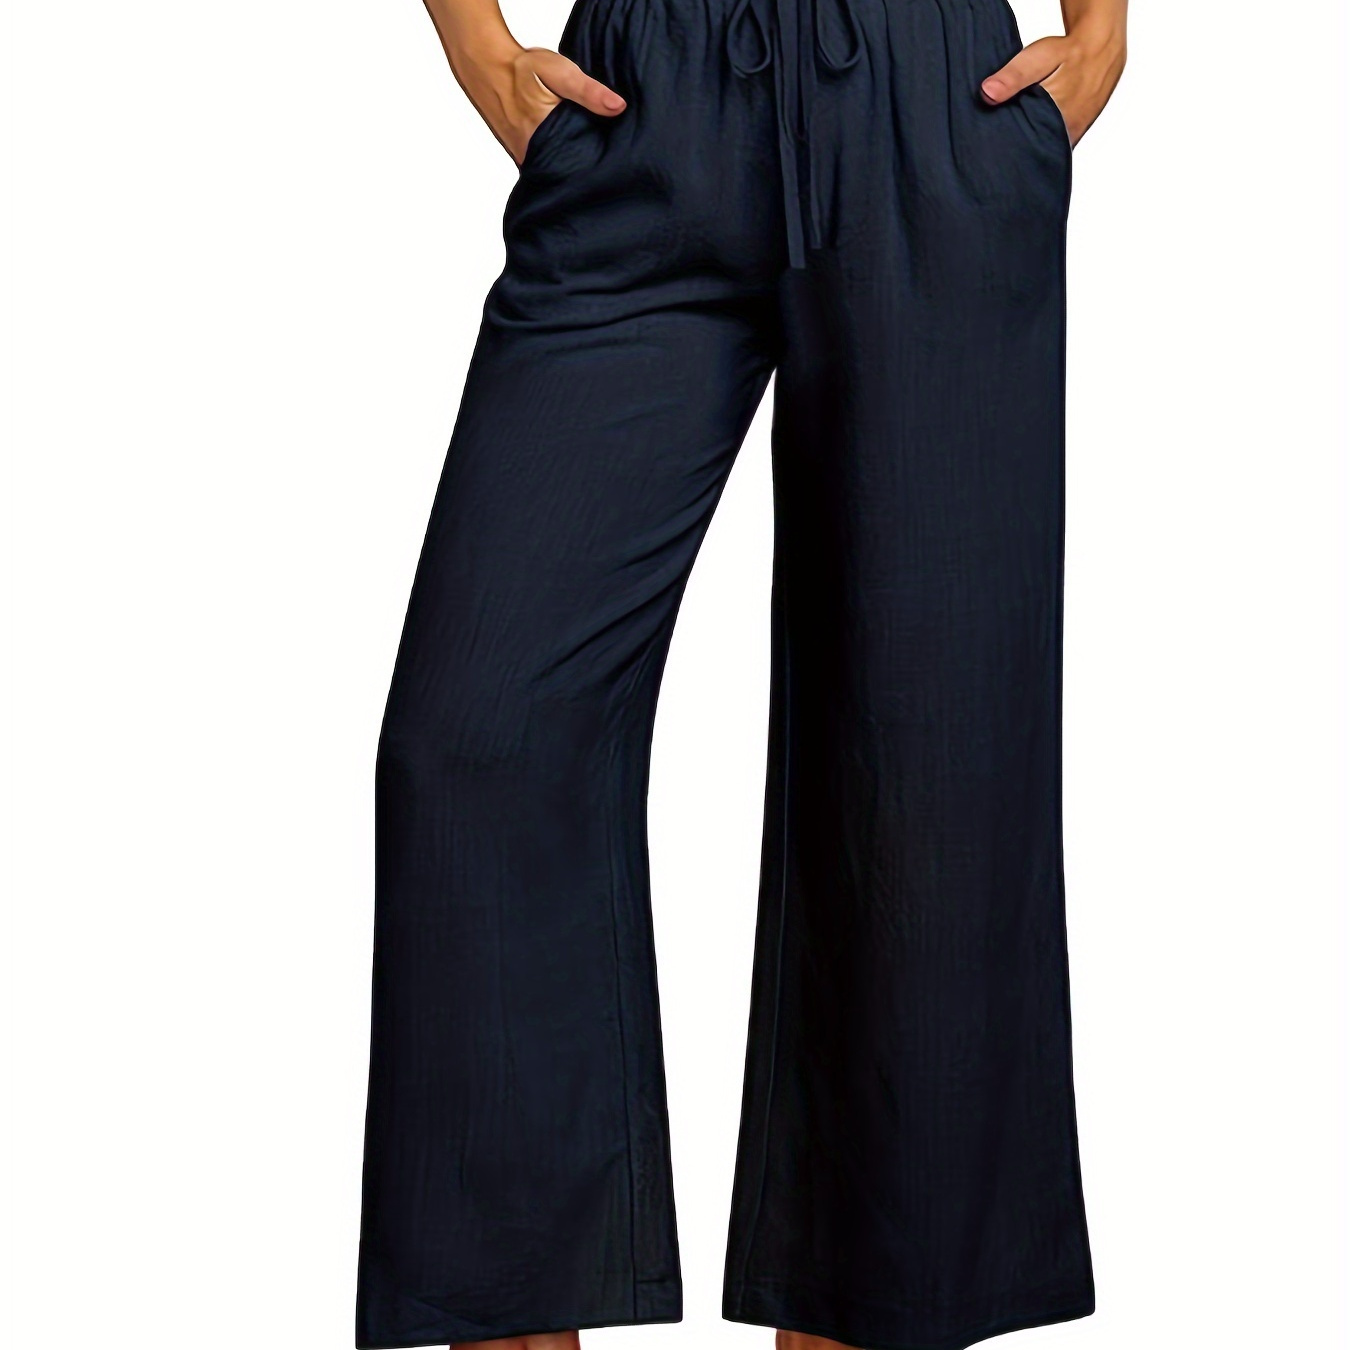 Women's Casual Loose High Waist Linen Pants, Drawstring Wide Leg Trousers  With Pockets